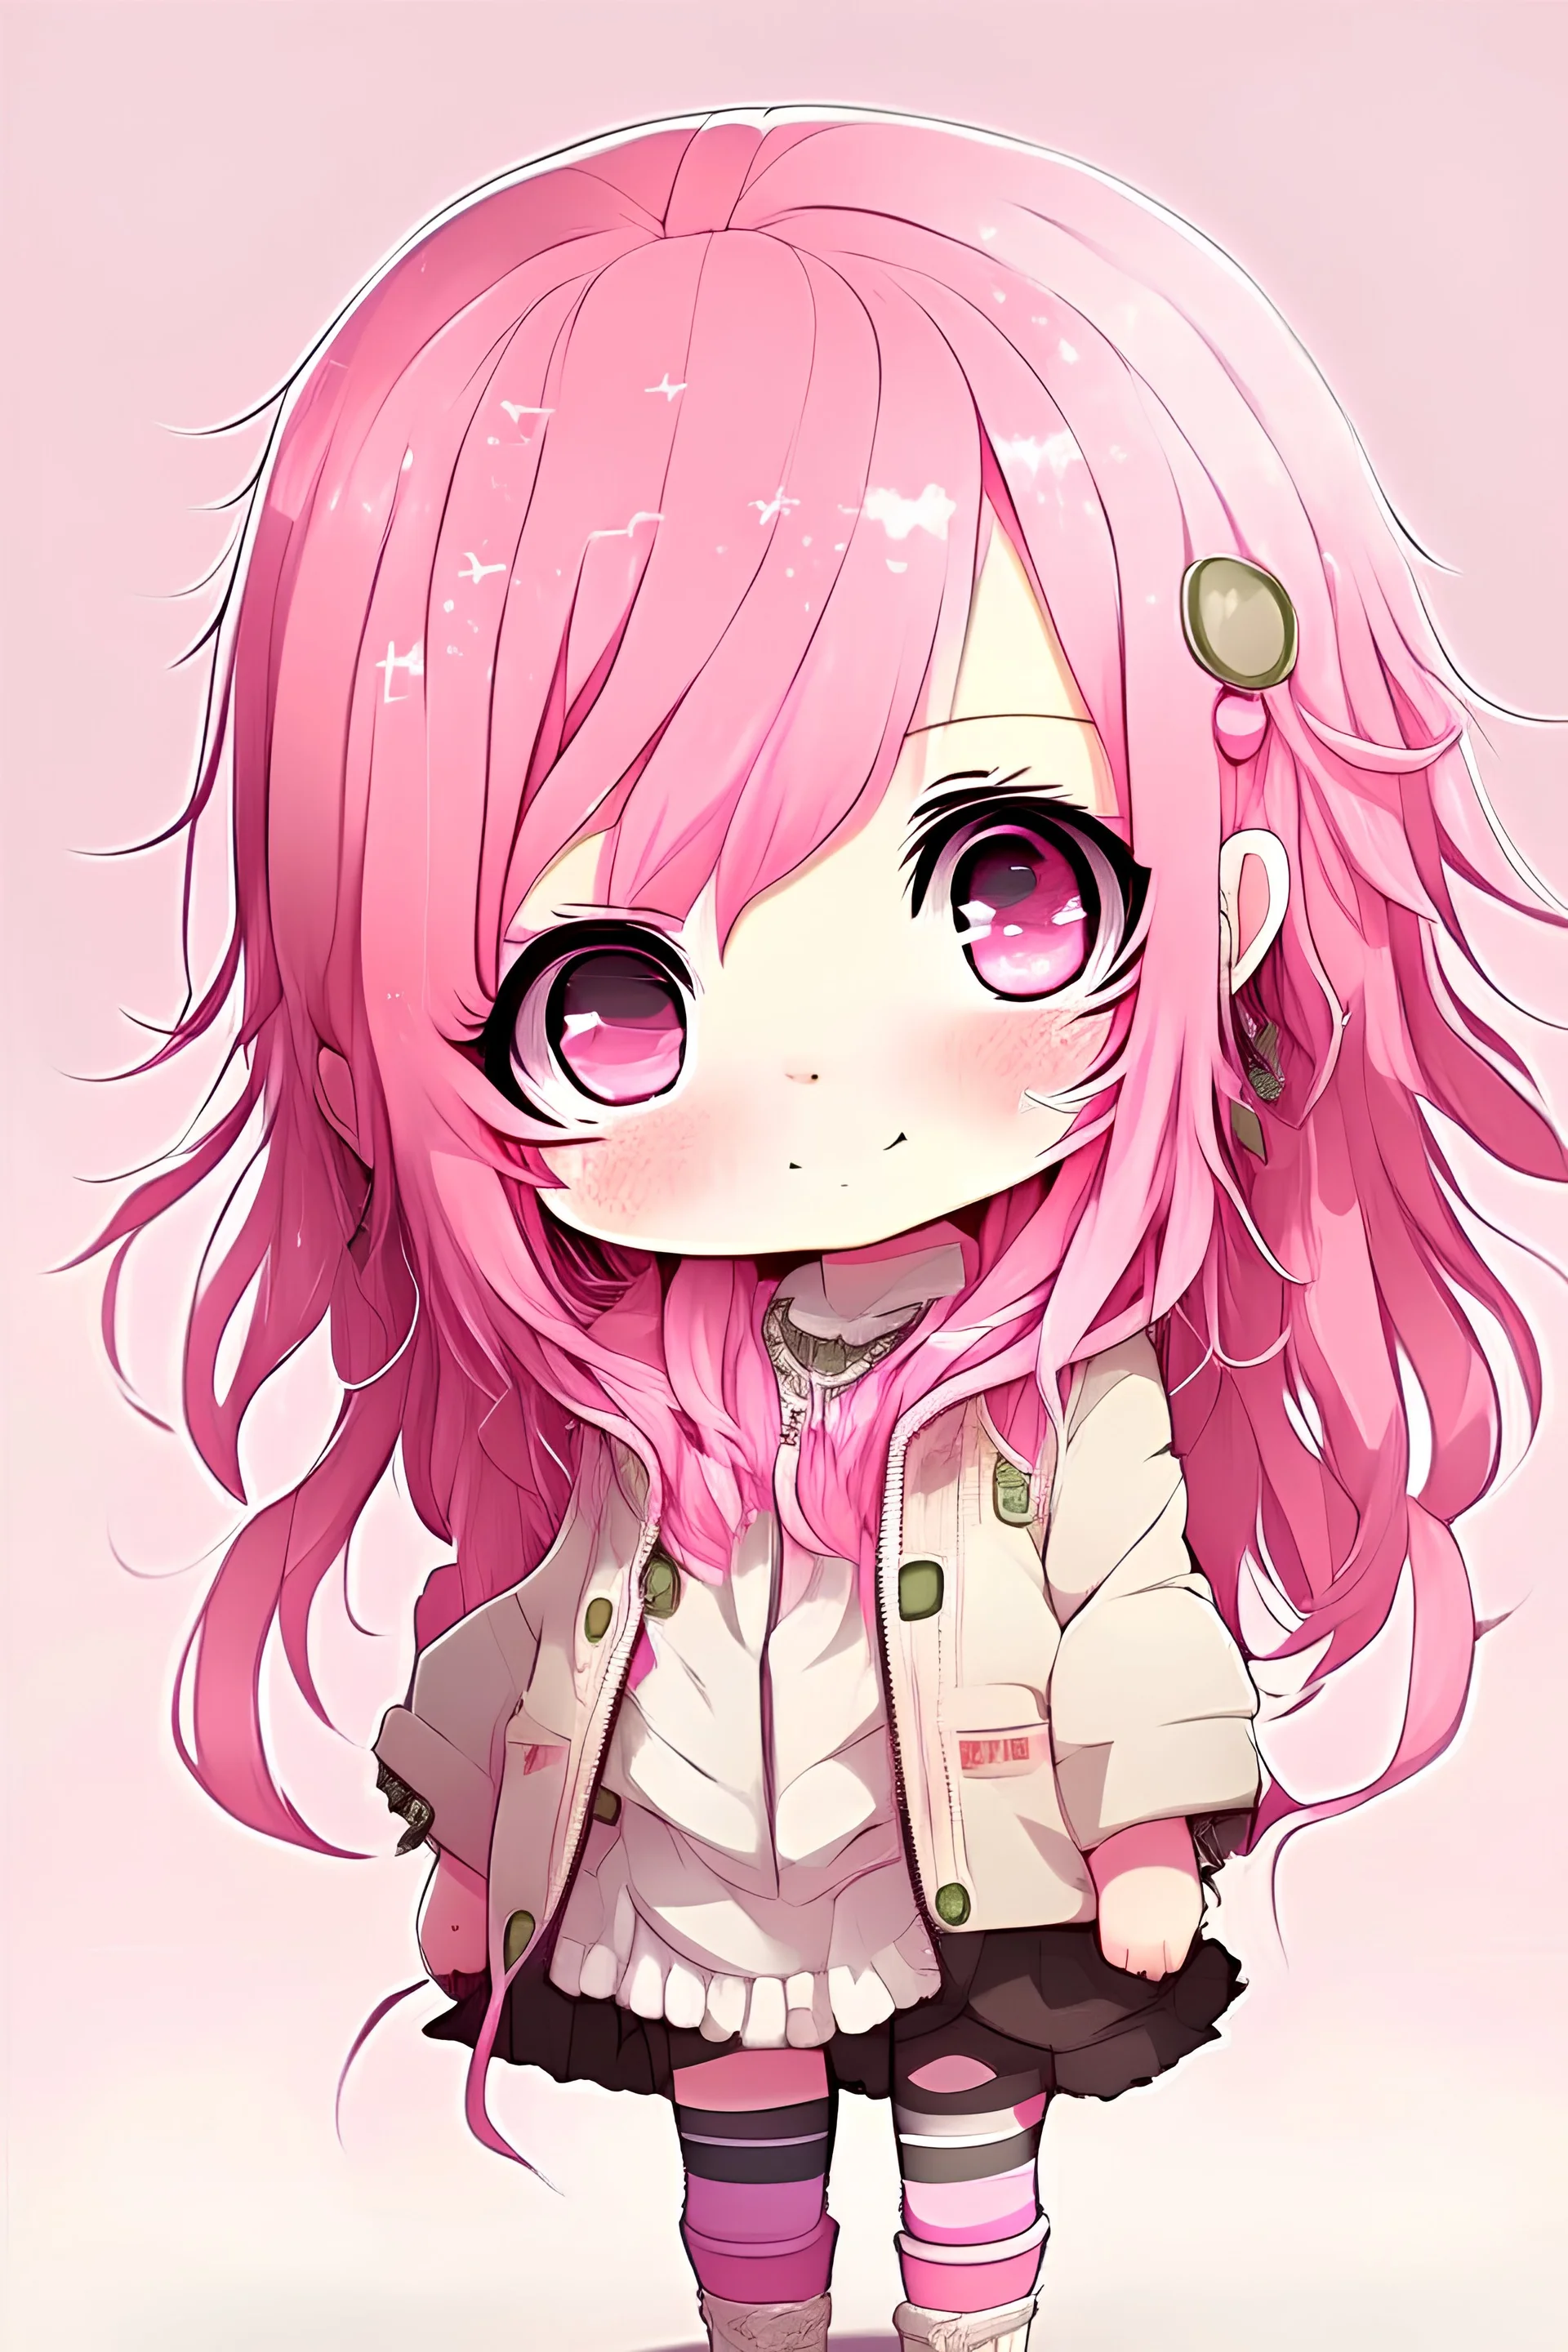 Cute chibi girl with pink hair